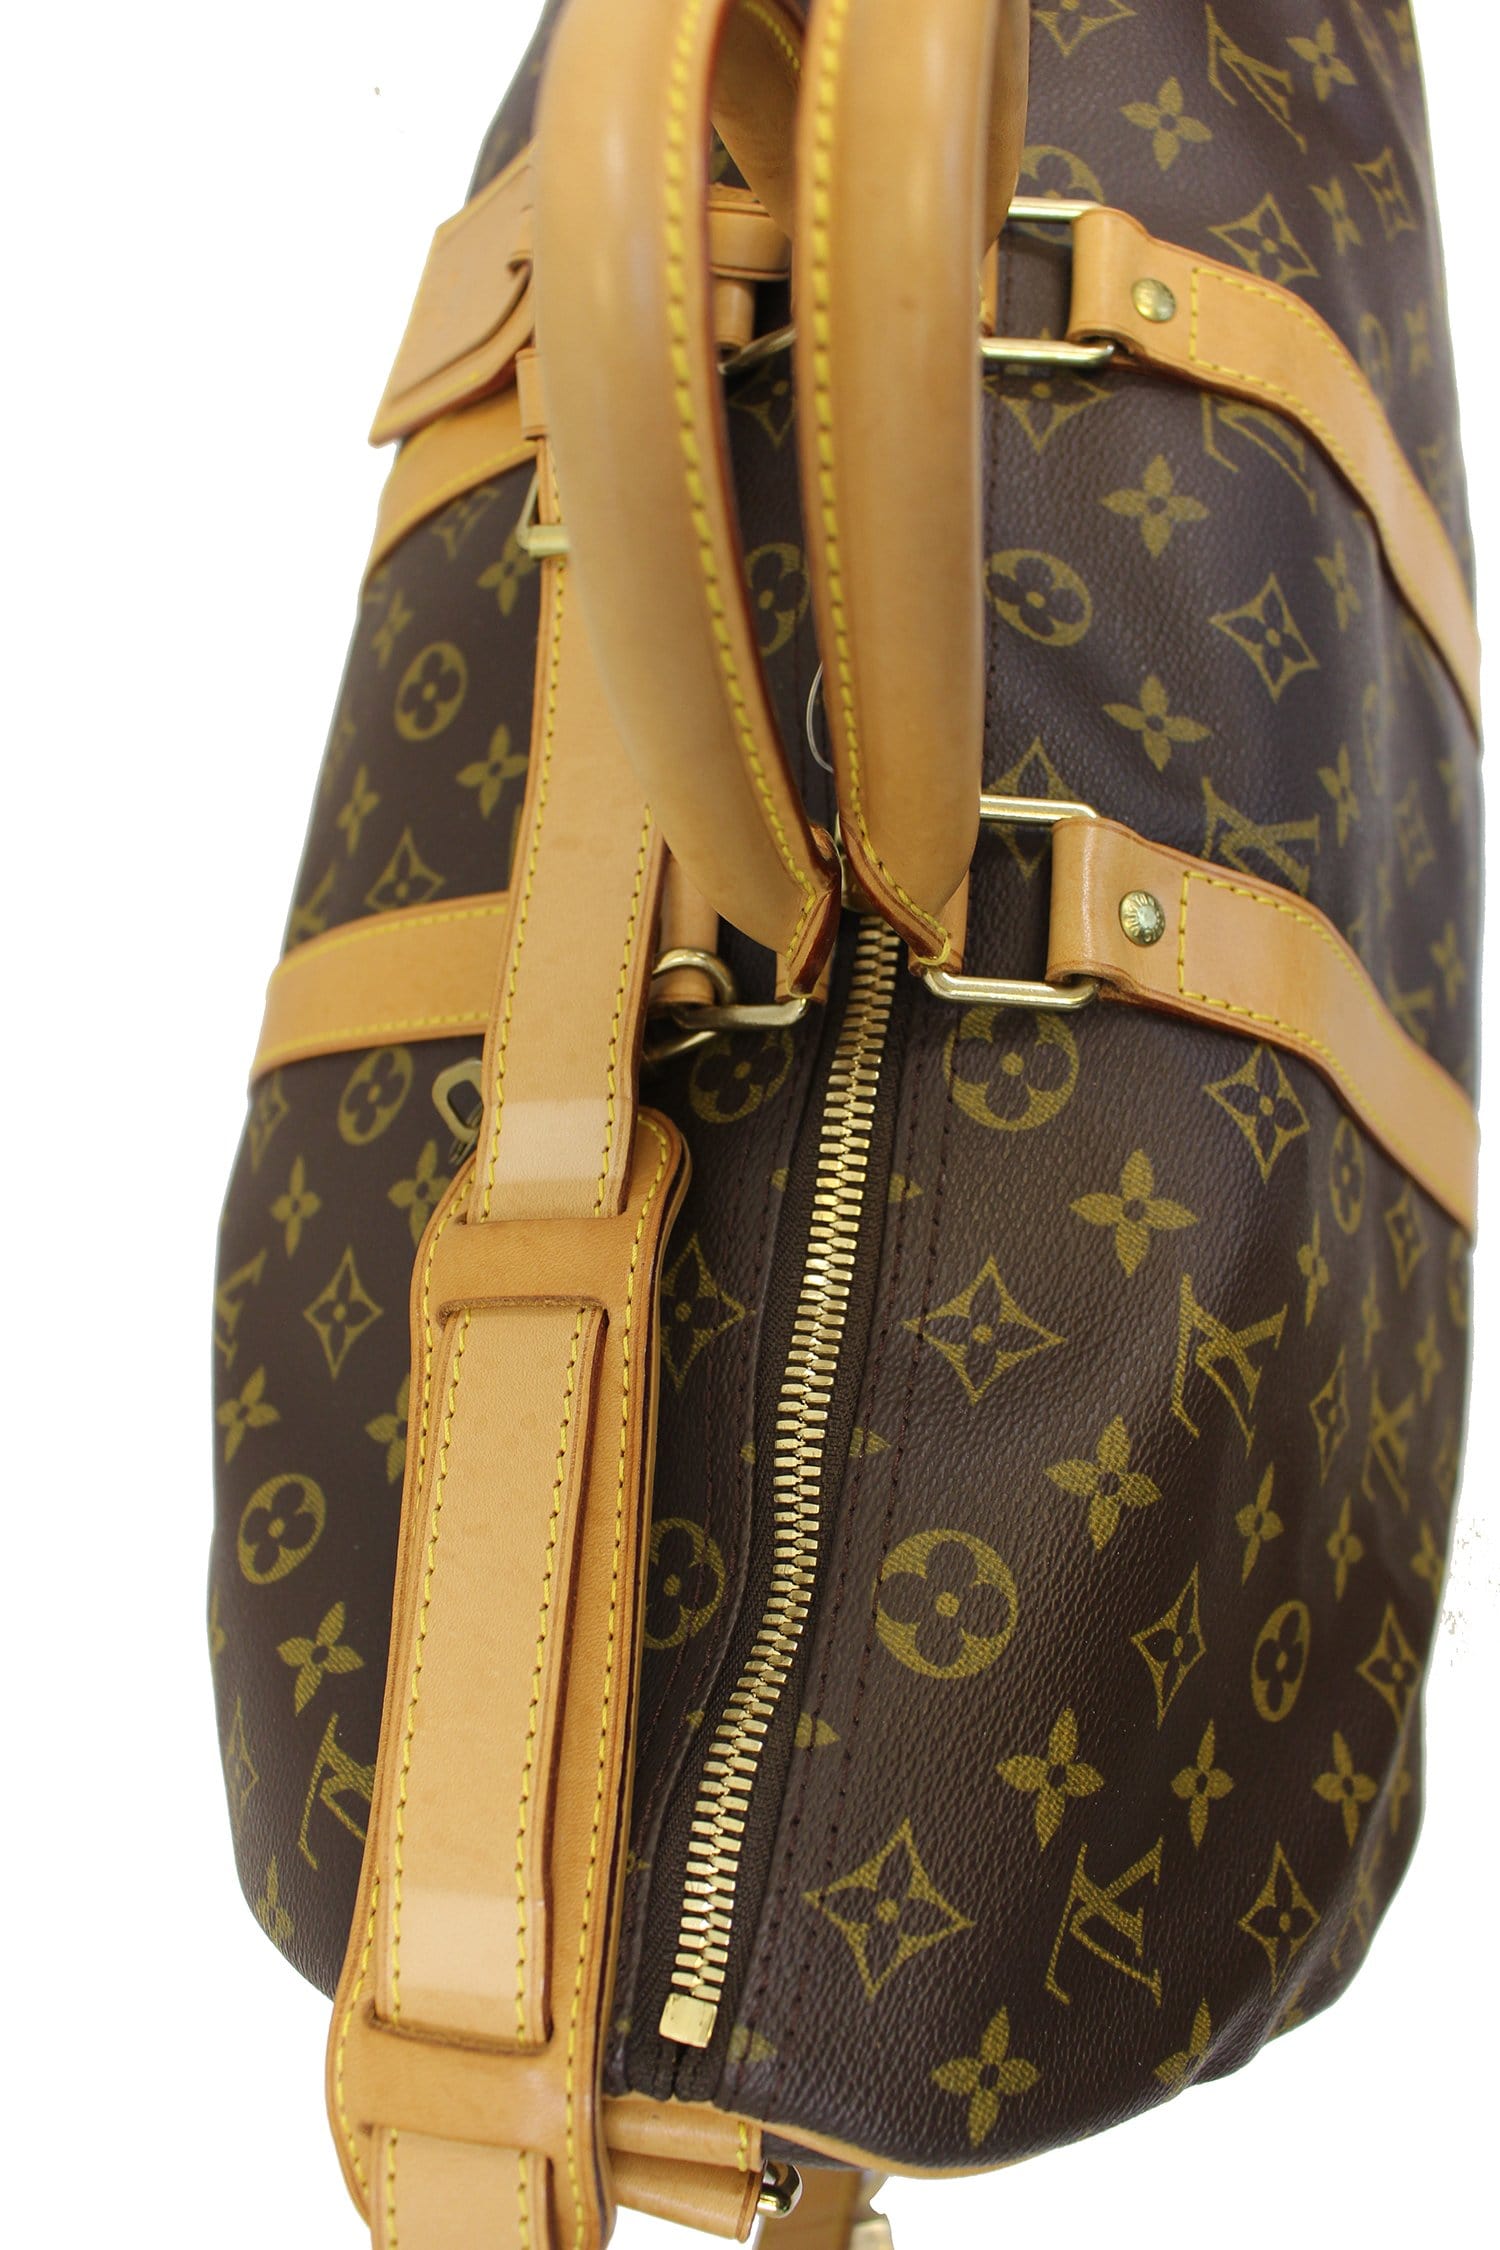 Reese Witherspoon with Louis Vuitton Neverfull Mon Monogram Bag